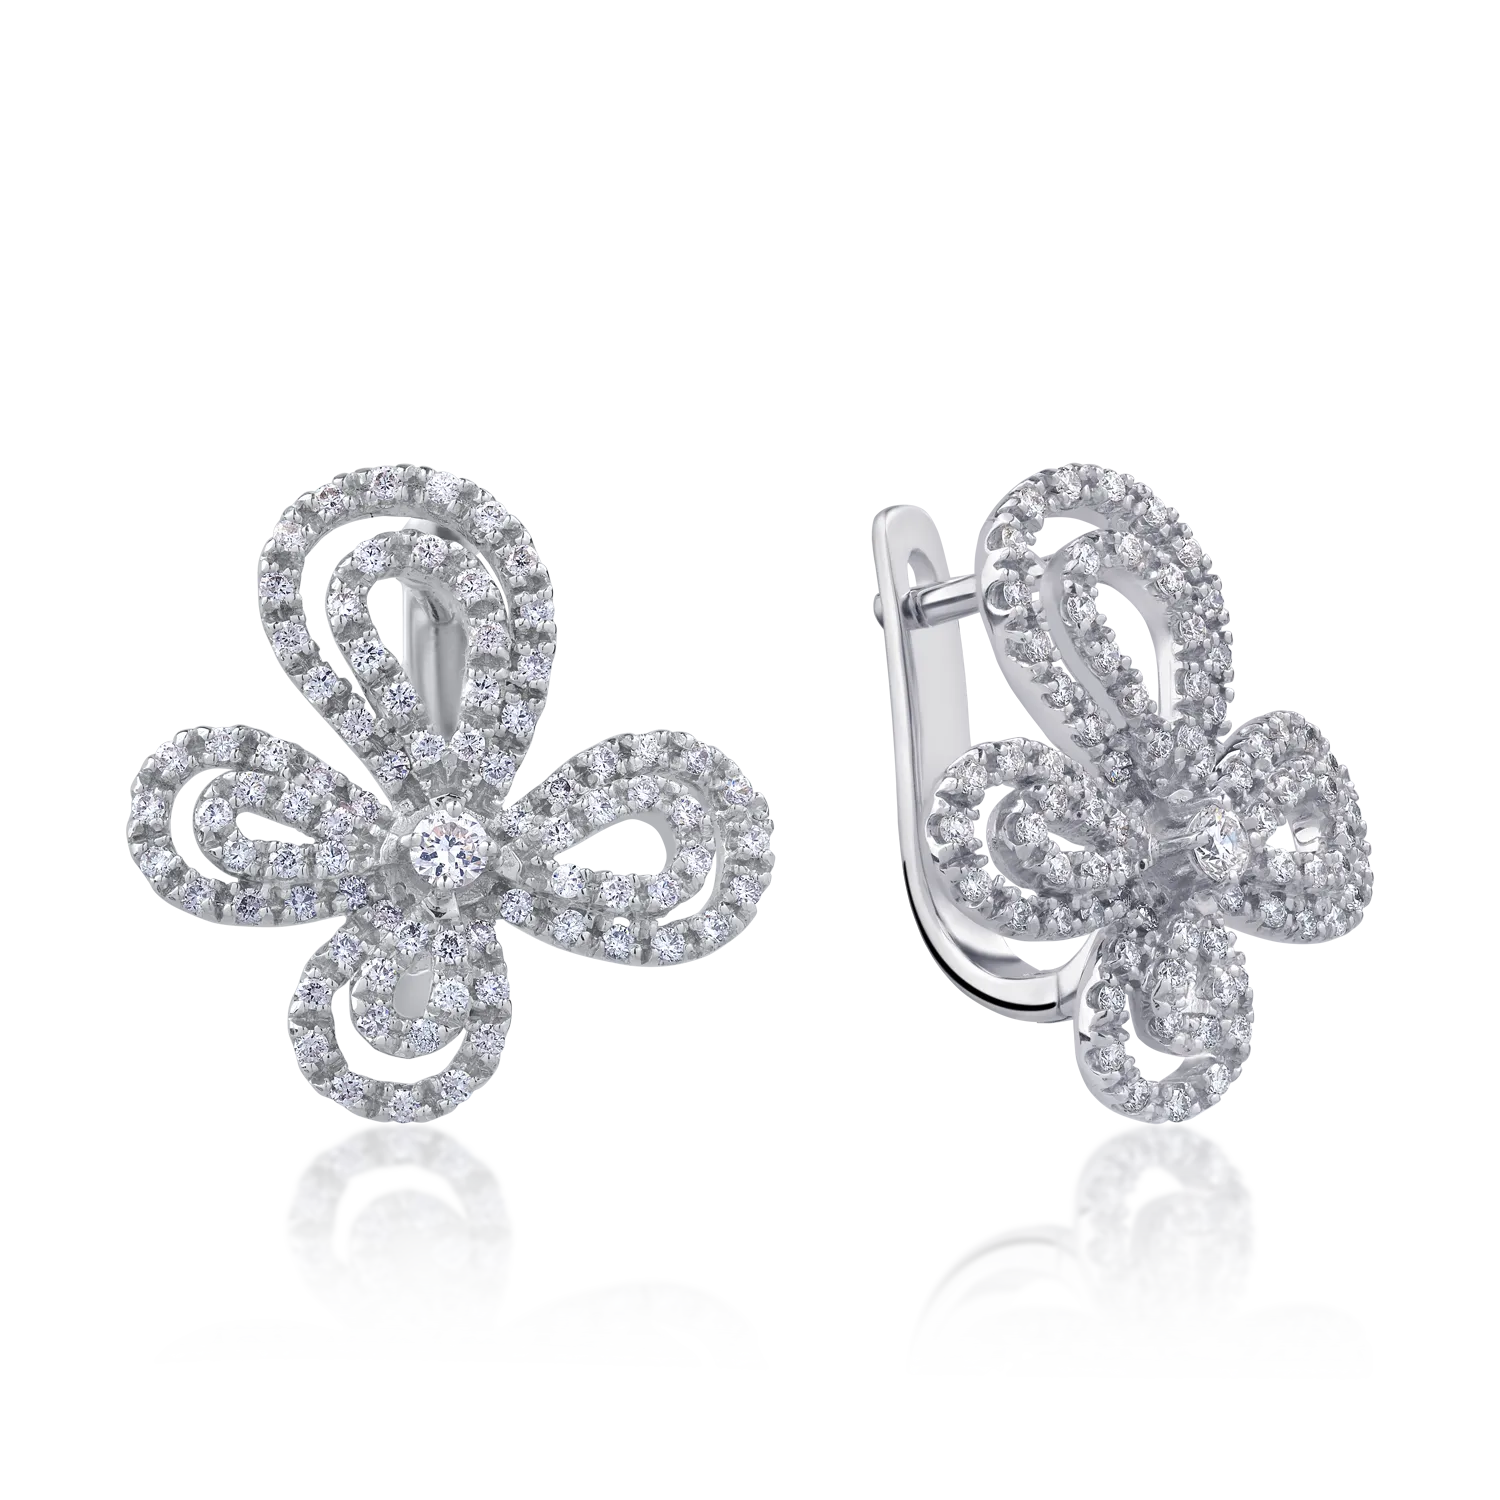 18K white gold earrings with 1.077ct diamonds